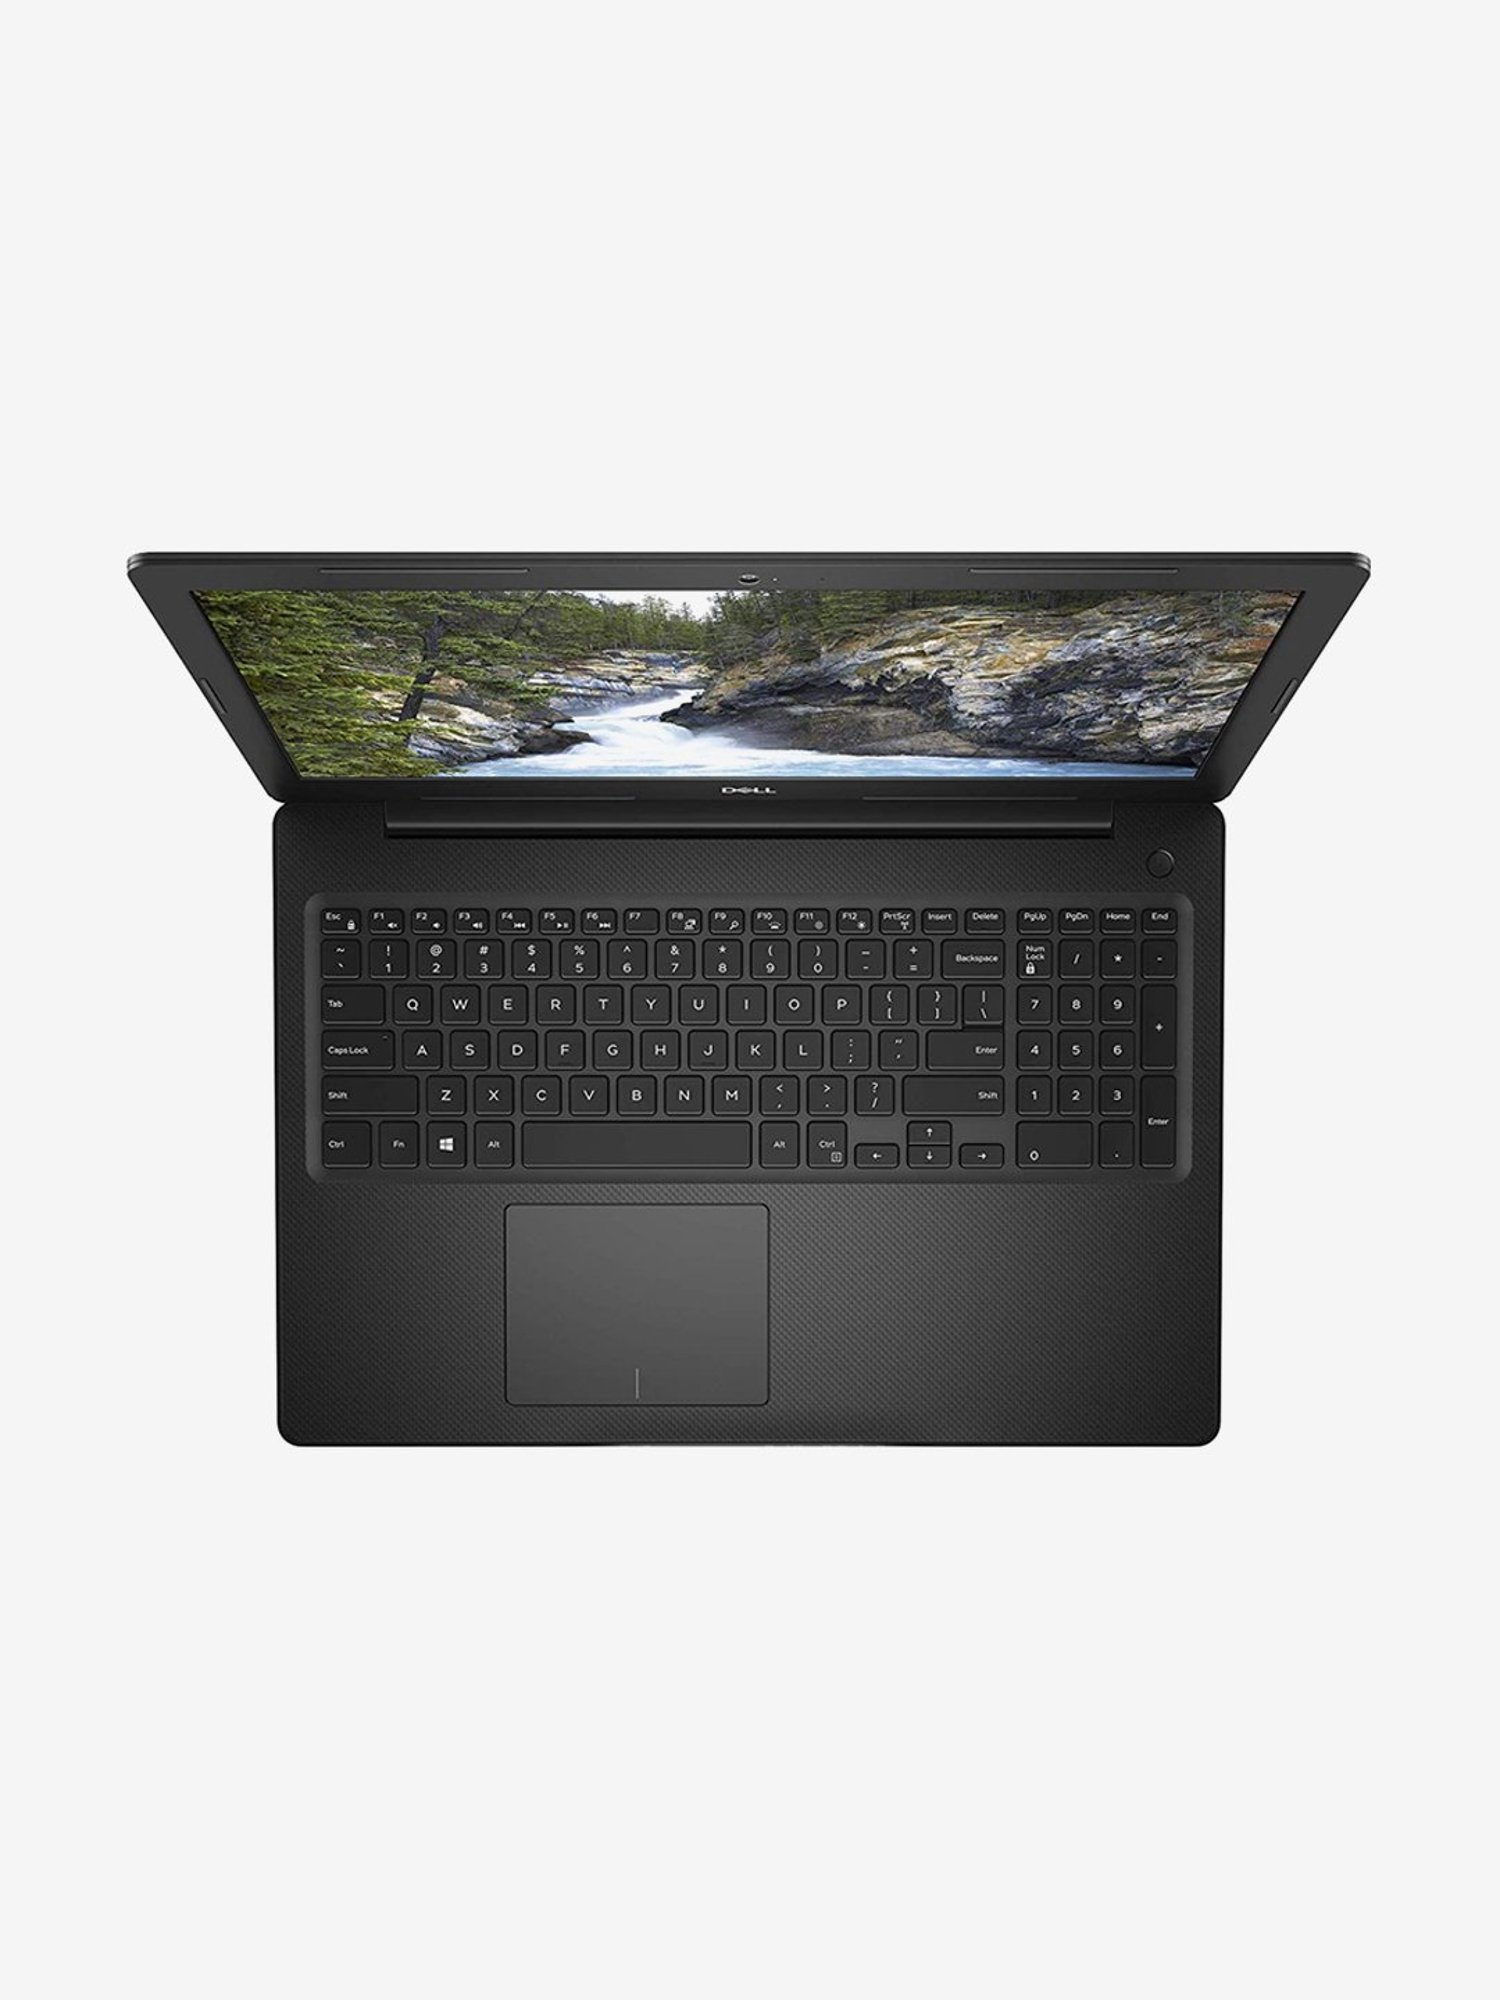 Dell Vostro Laptop 15 3580 I5 8thgen 8gb 1tb Hdd 15 6 Inch Linux 2gb Graphics Black From Dell At Best Prices On Tata Cliq